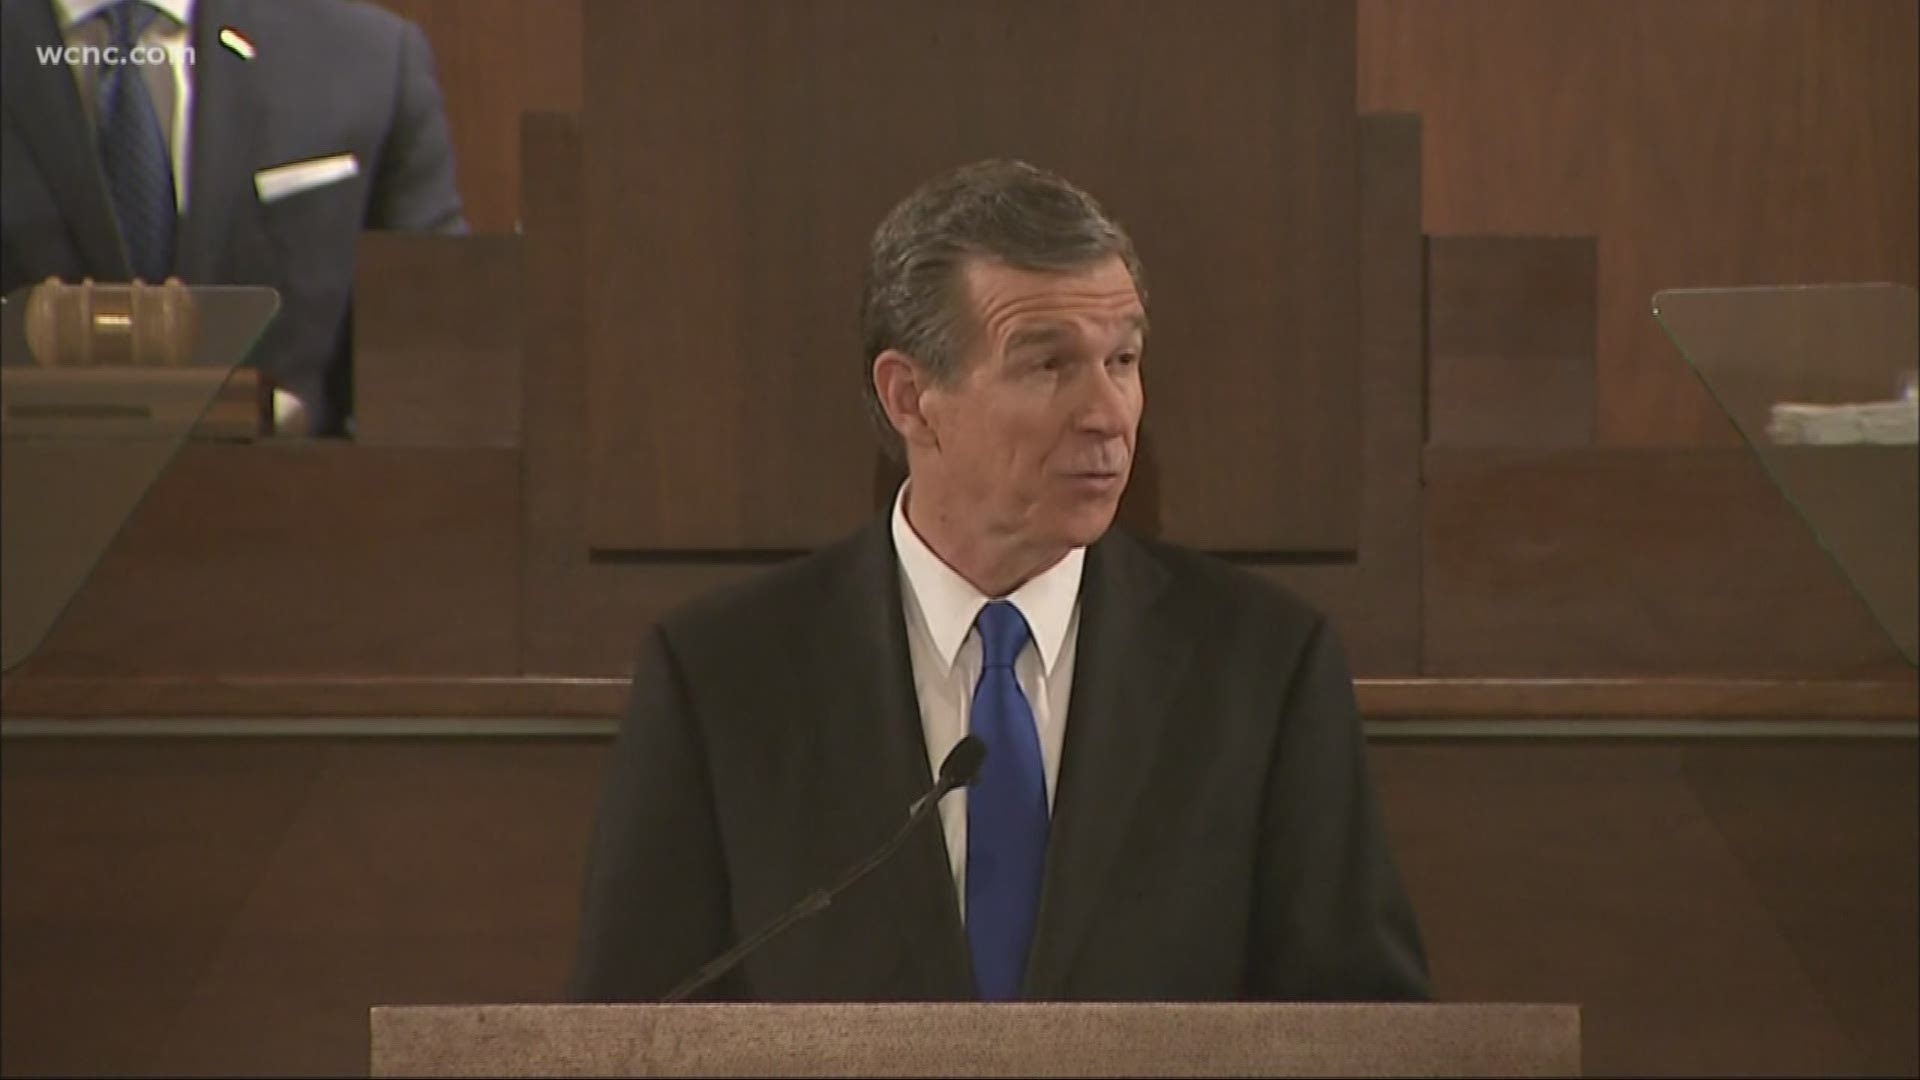 During his State of the State address, North Carolina Gov. Roy Cooper said his focus will be on the economy and schools in 2019, saying he will put efforts toward increasing teacher pay and building new schools.